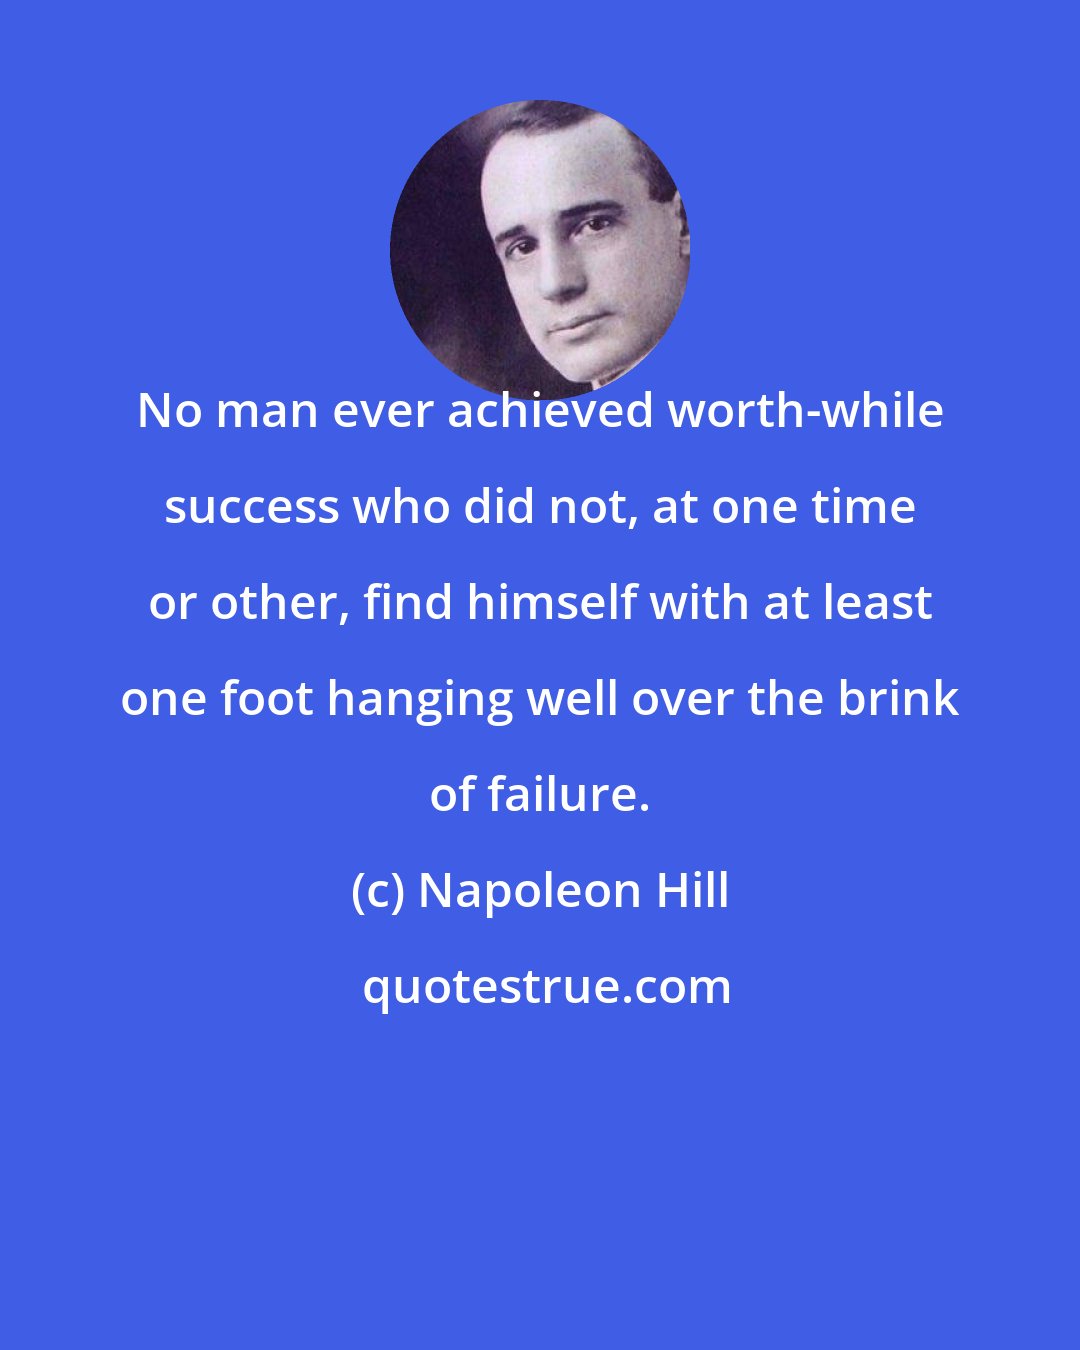 Napoleon Hill: No man ever achieved worth-while success who did not, at one time or other, find himself with at least one foot hanging well over the brink of failure.